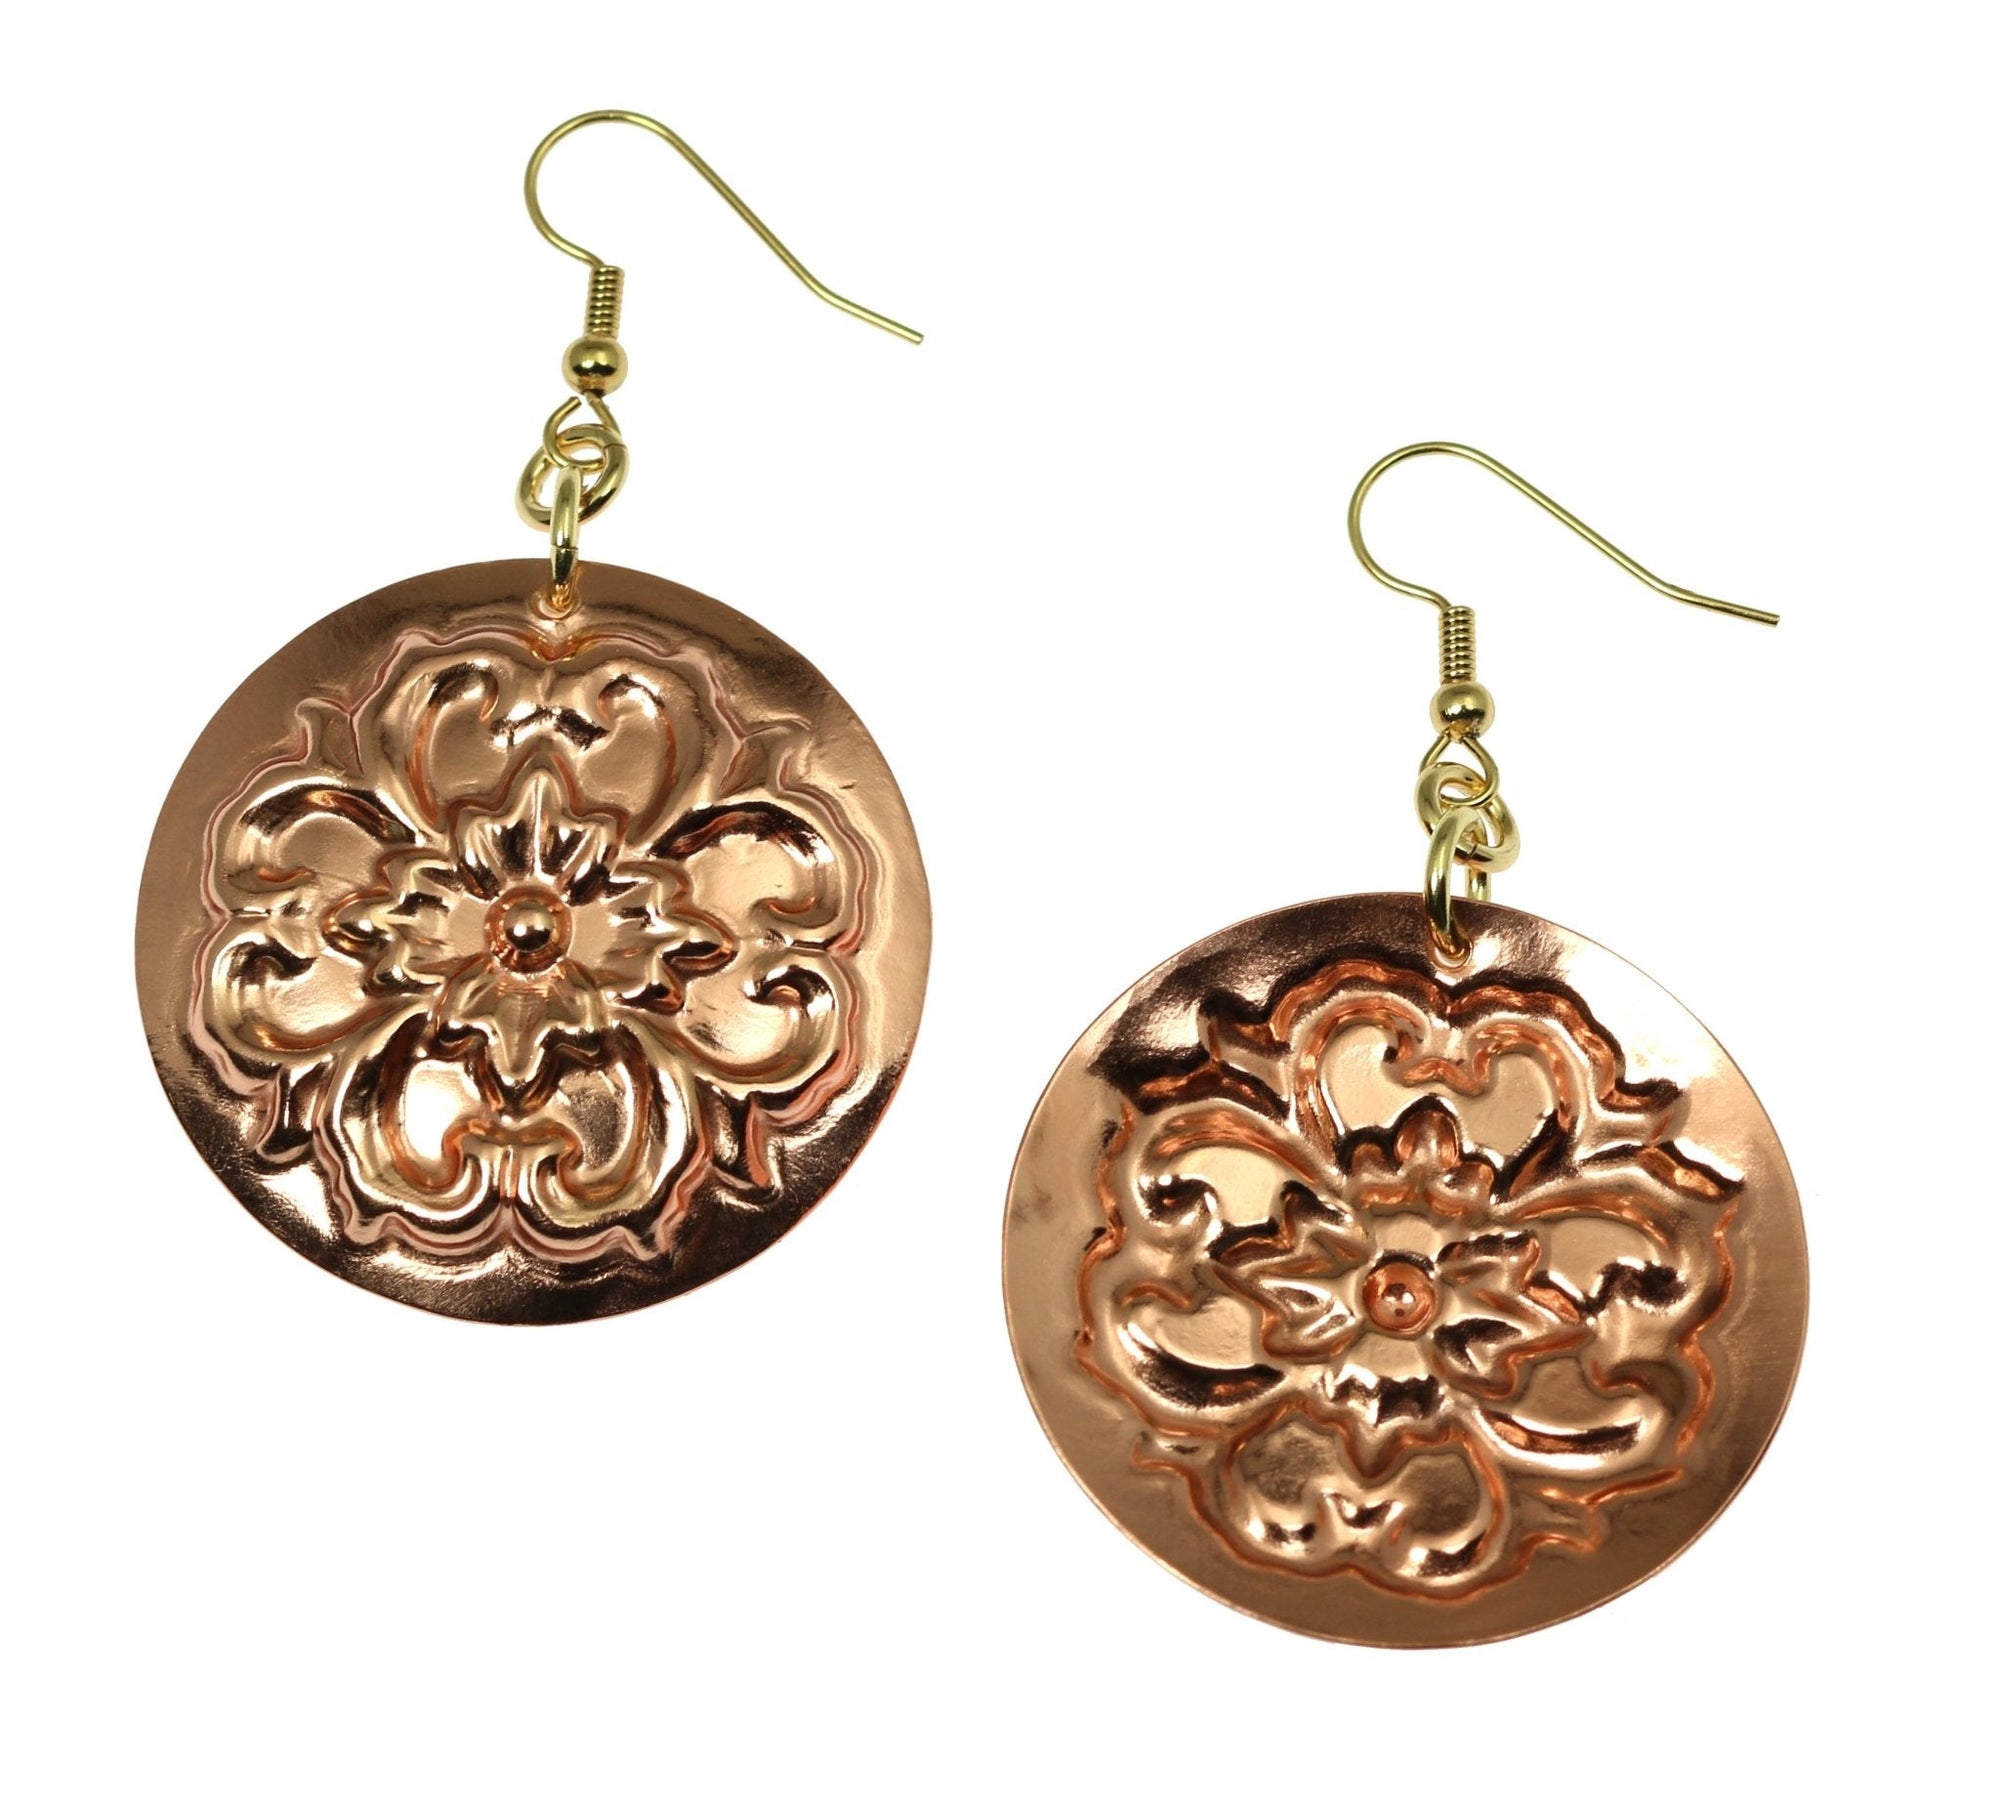 Detail View of Copper Forget Me Not Disc Earrings